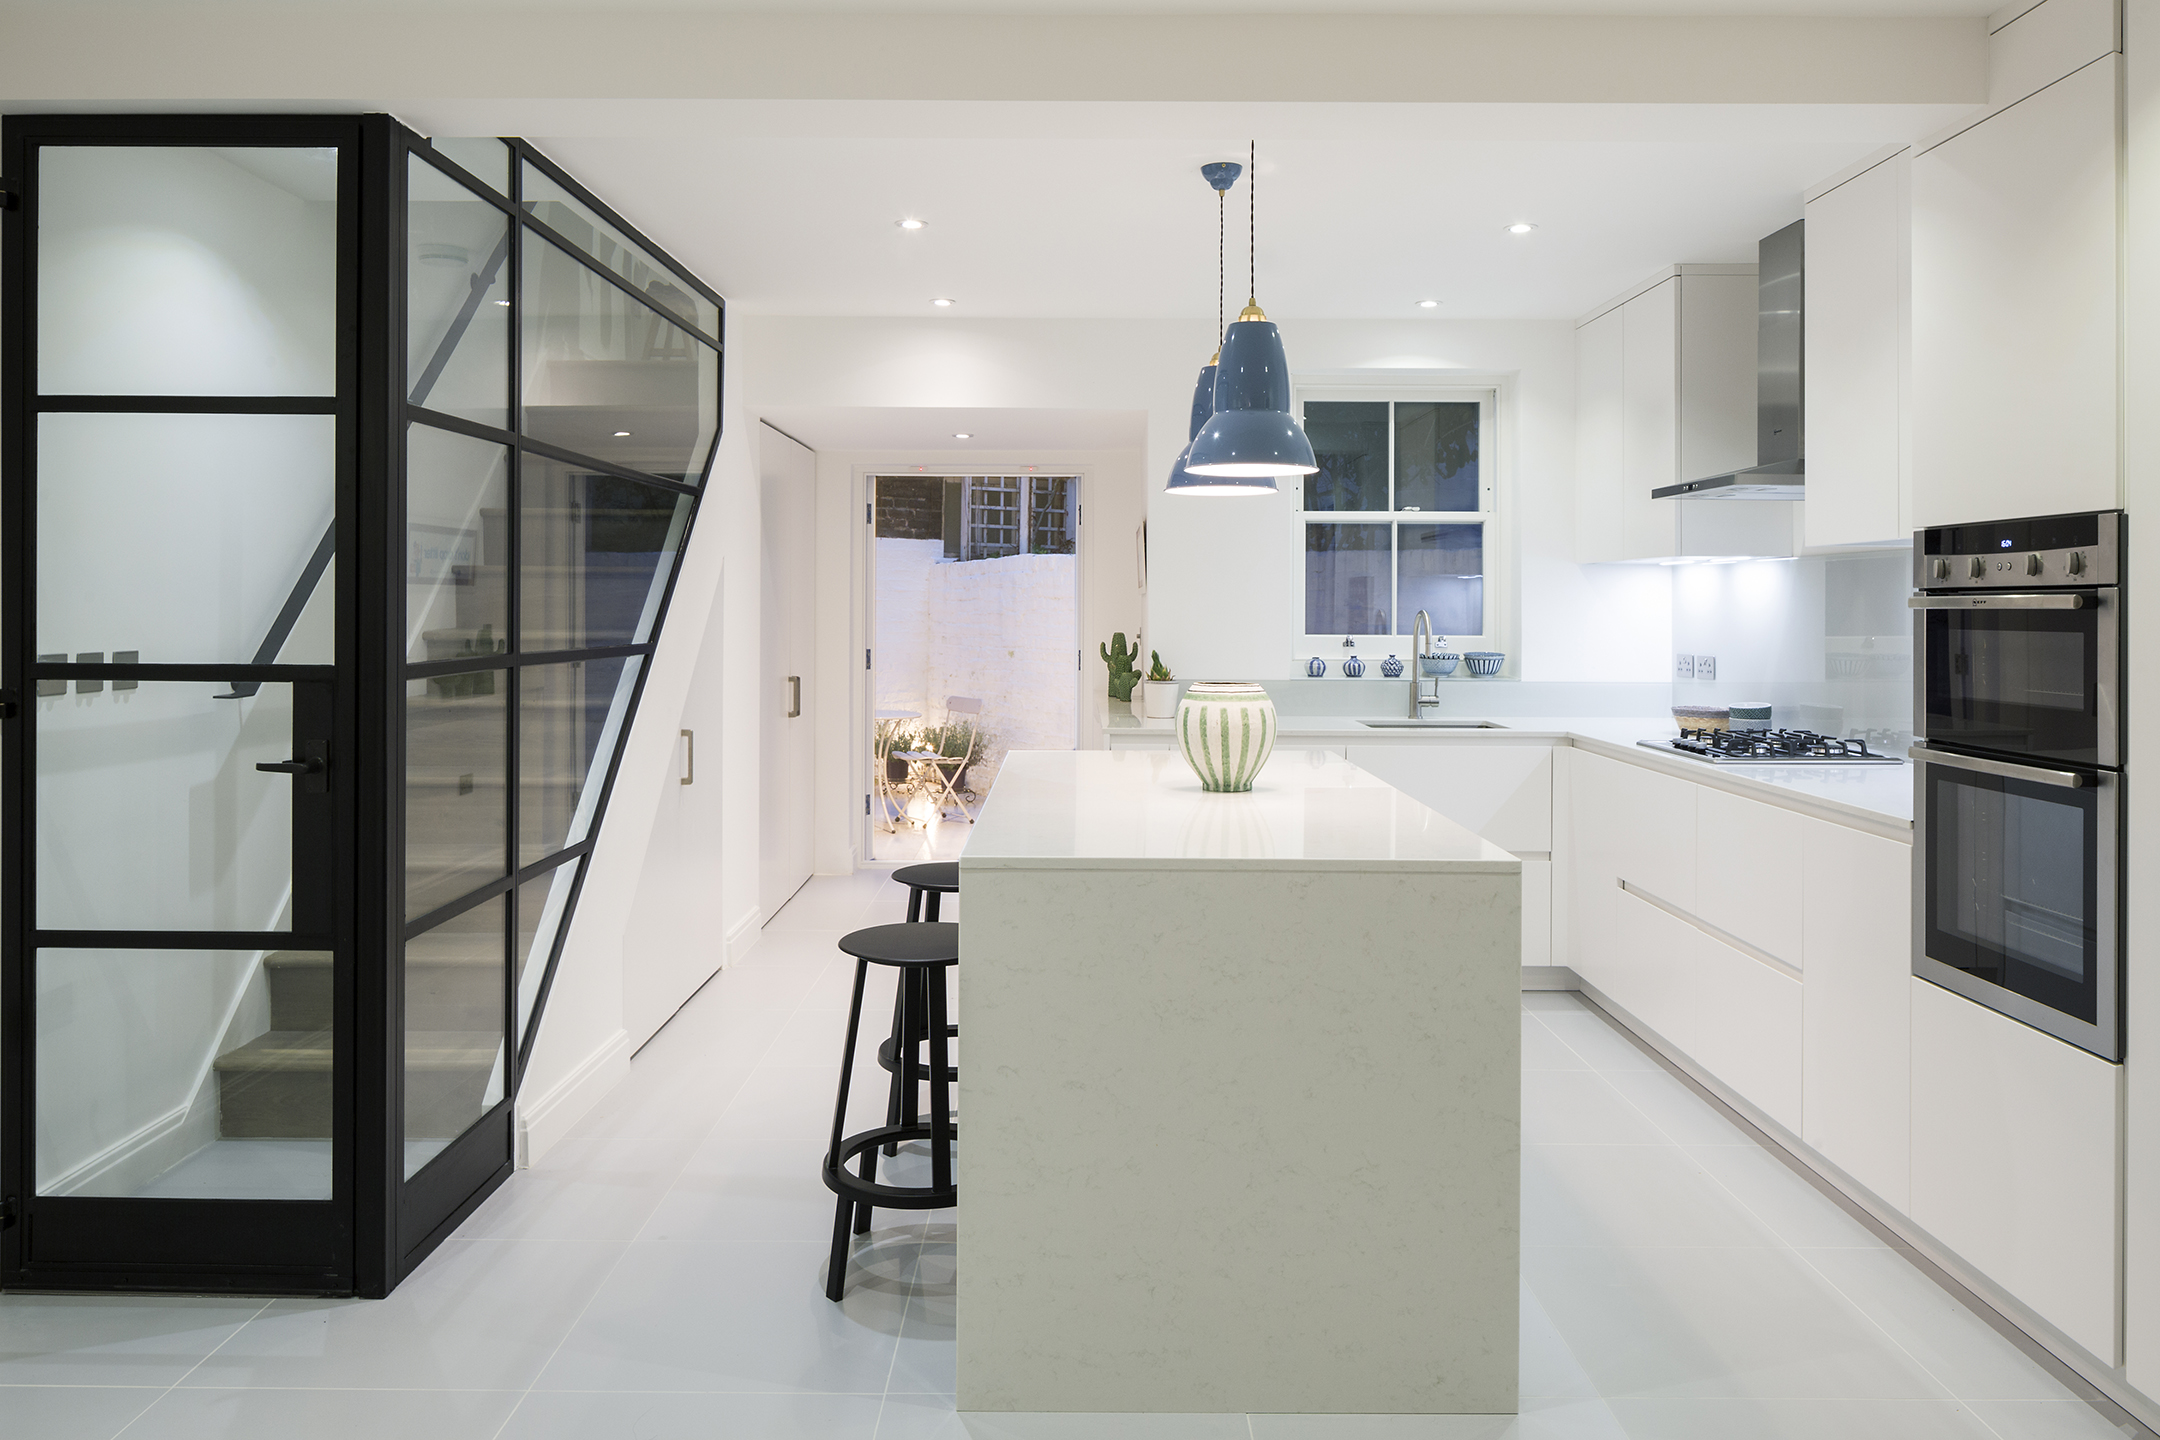 </p> <p>Find your ideal home design pro on designfor-me.com - get matched and see who's interested in your home project. Click image to see more inspiration from our design pros</p> <p>Design by Milena, interior designer from Southwark, London</p> <p> #interiordesign #interiors #homedecor #homeinspiration #kitchens #kitchendesign #kitcheninspiration #kitchenideas #kitchengoals #glazing #architecturalglazing #naturallight </p> <p>